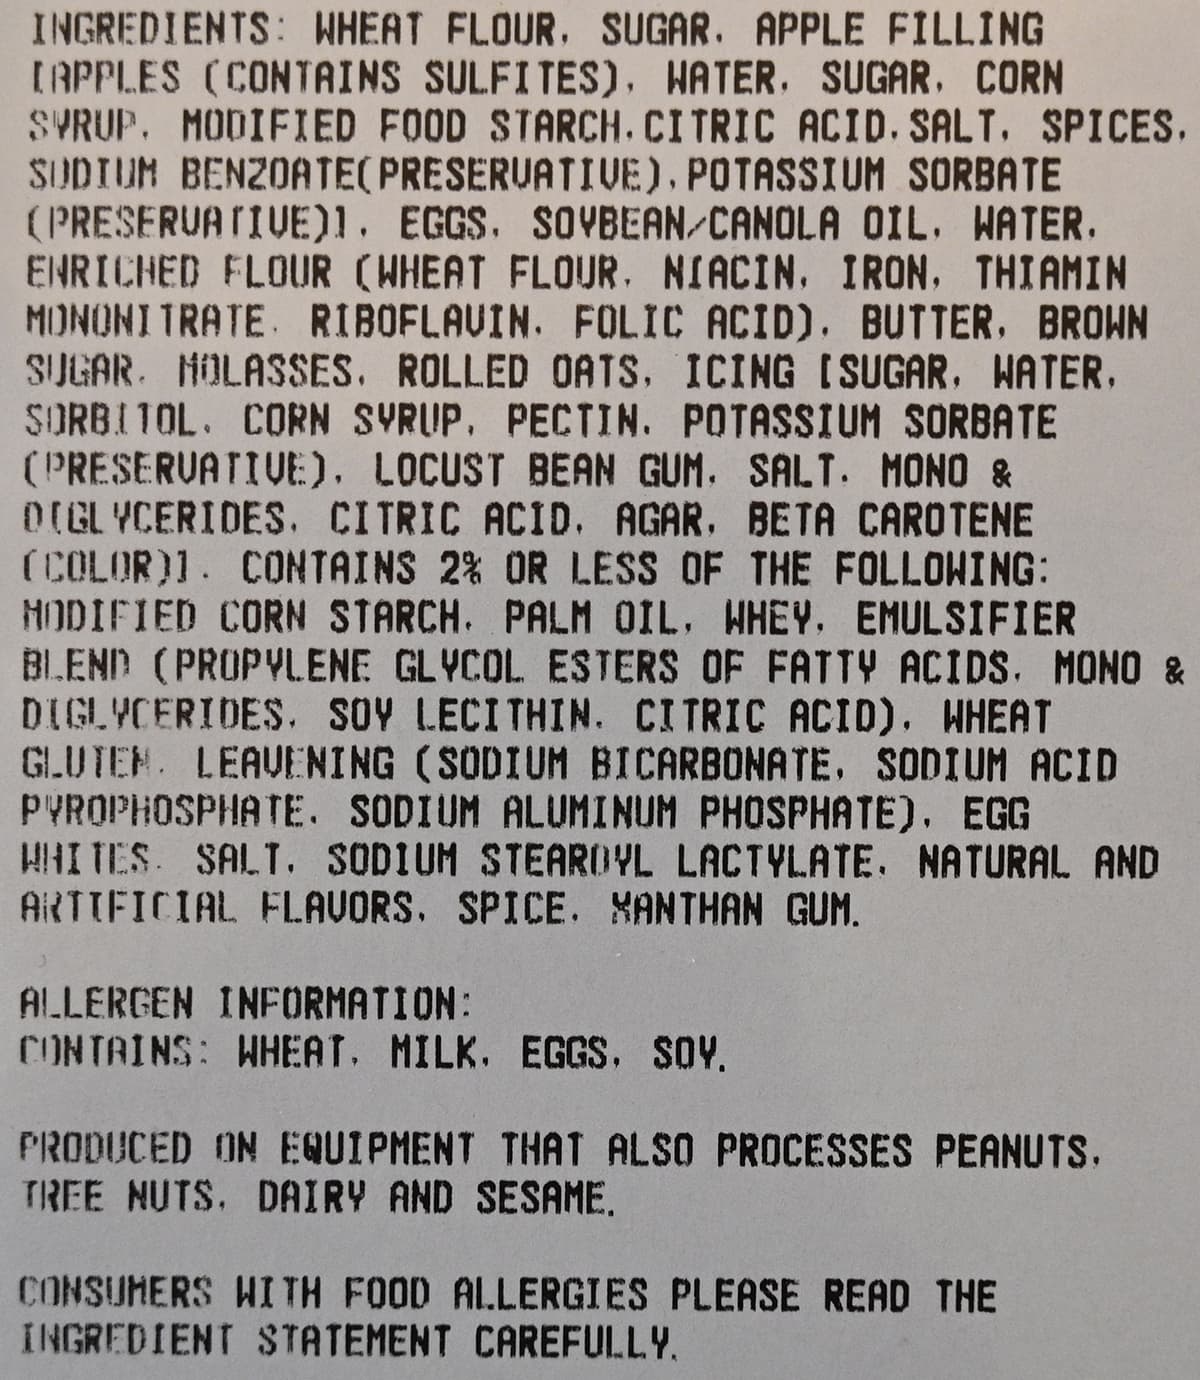 Image of the apple crumb muffin ingredients label from the package.